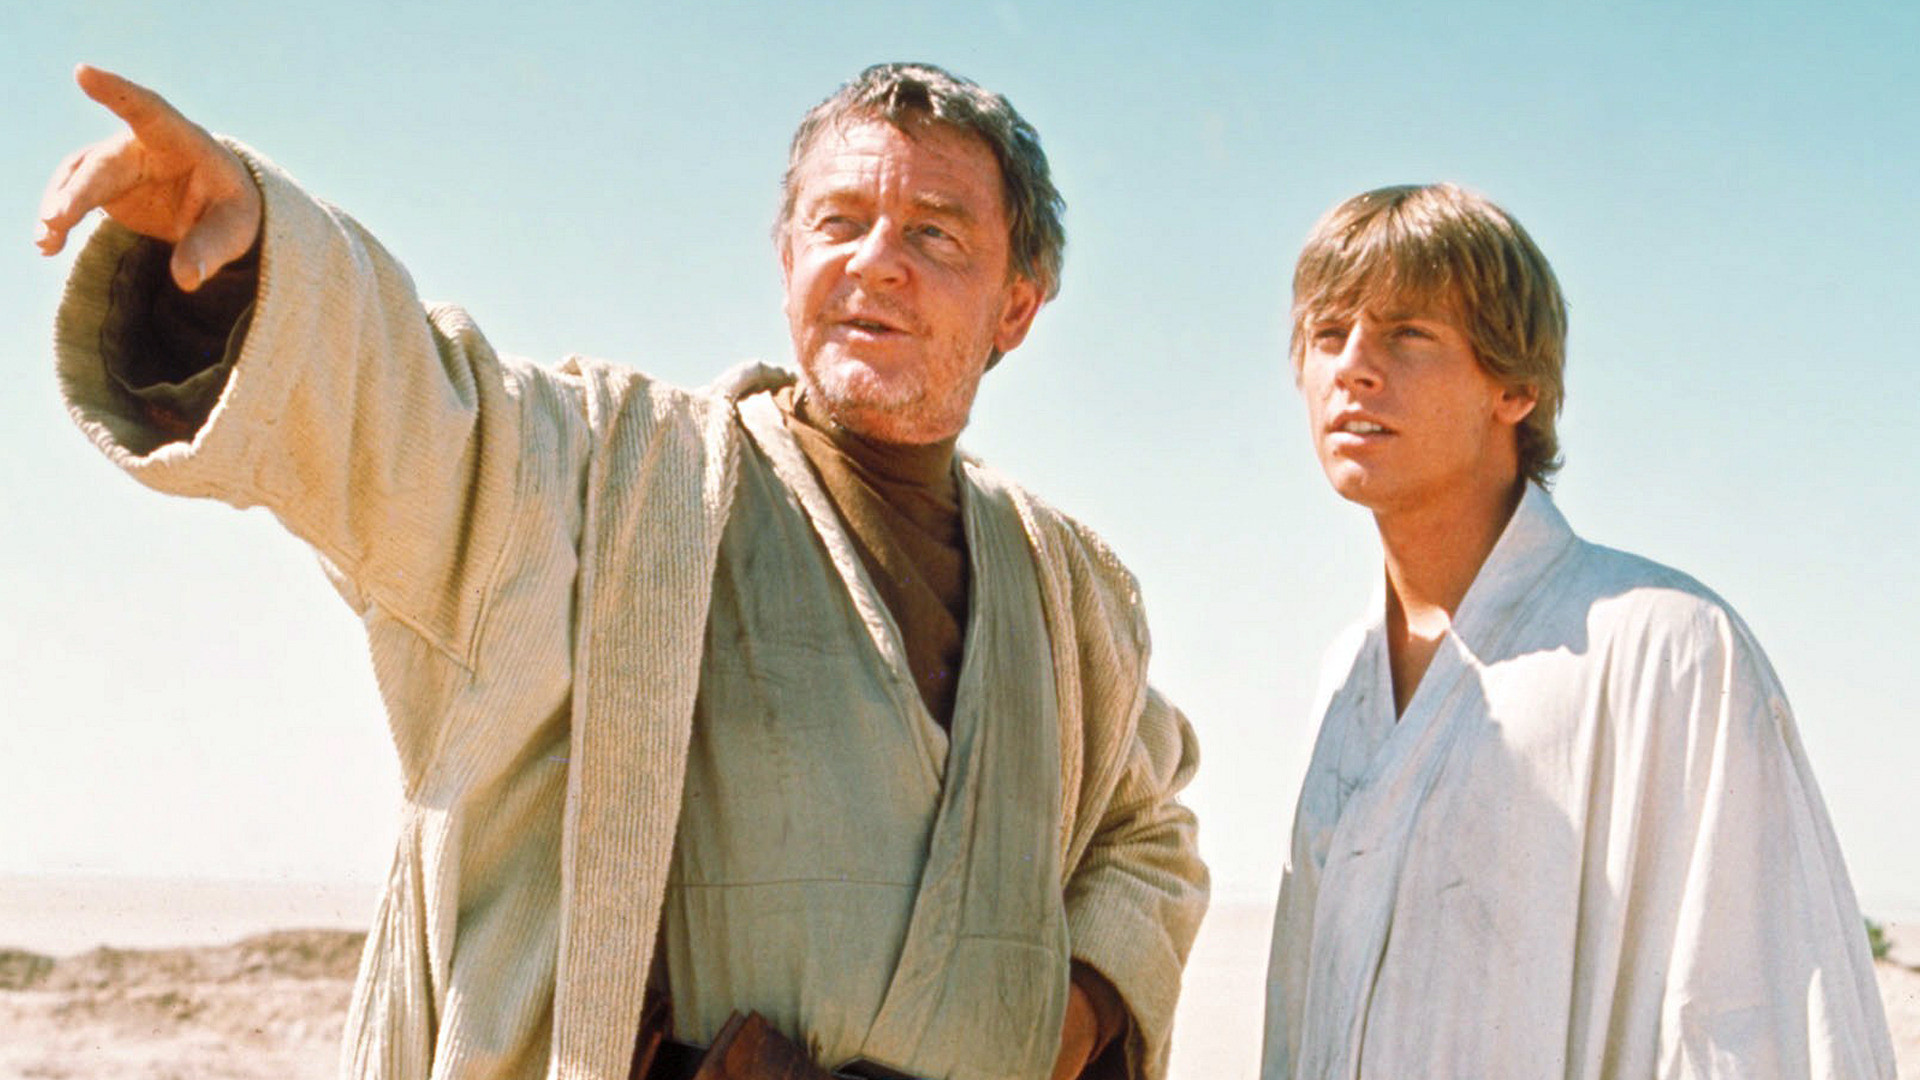 Movie Star Wars Episode IV: A New Hope HD Wallpaper | Background Image